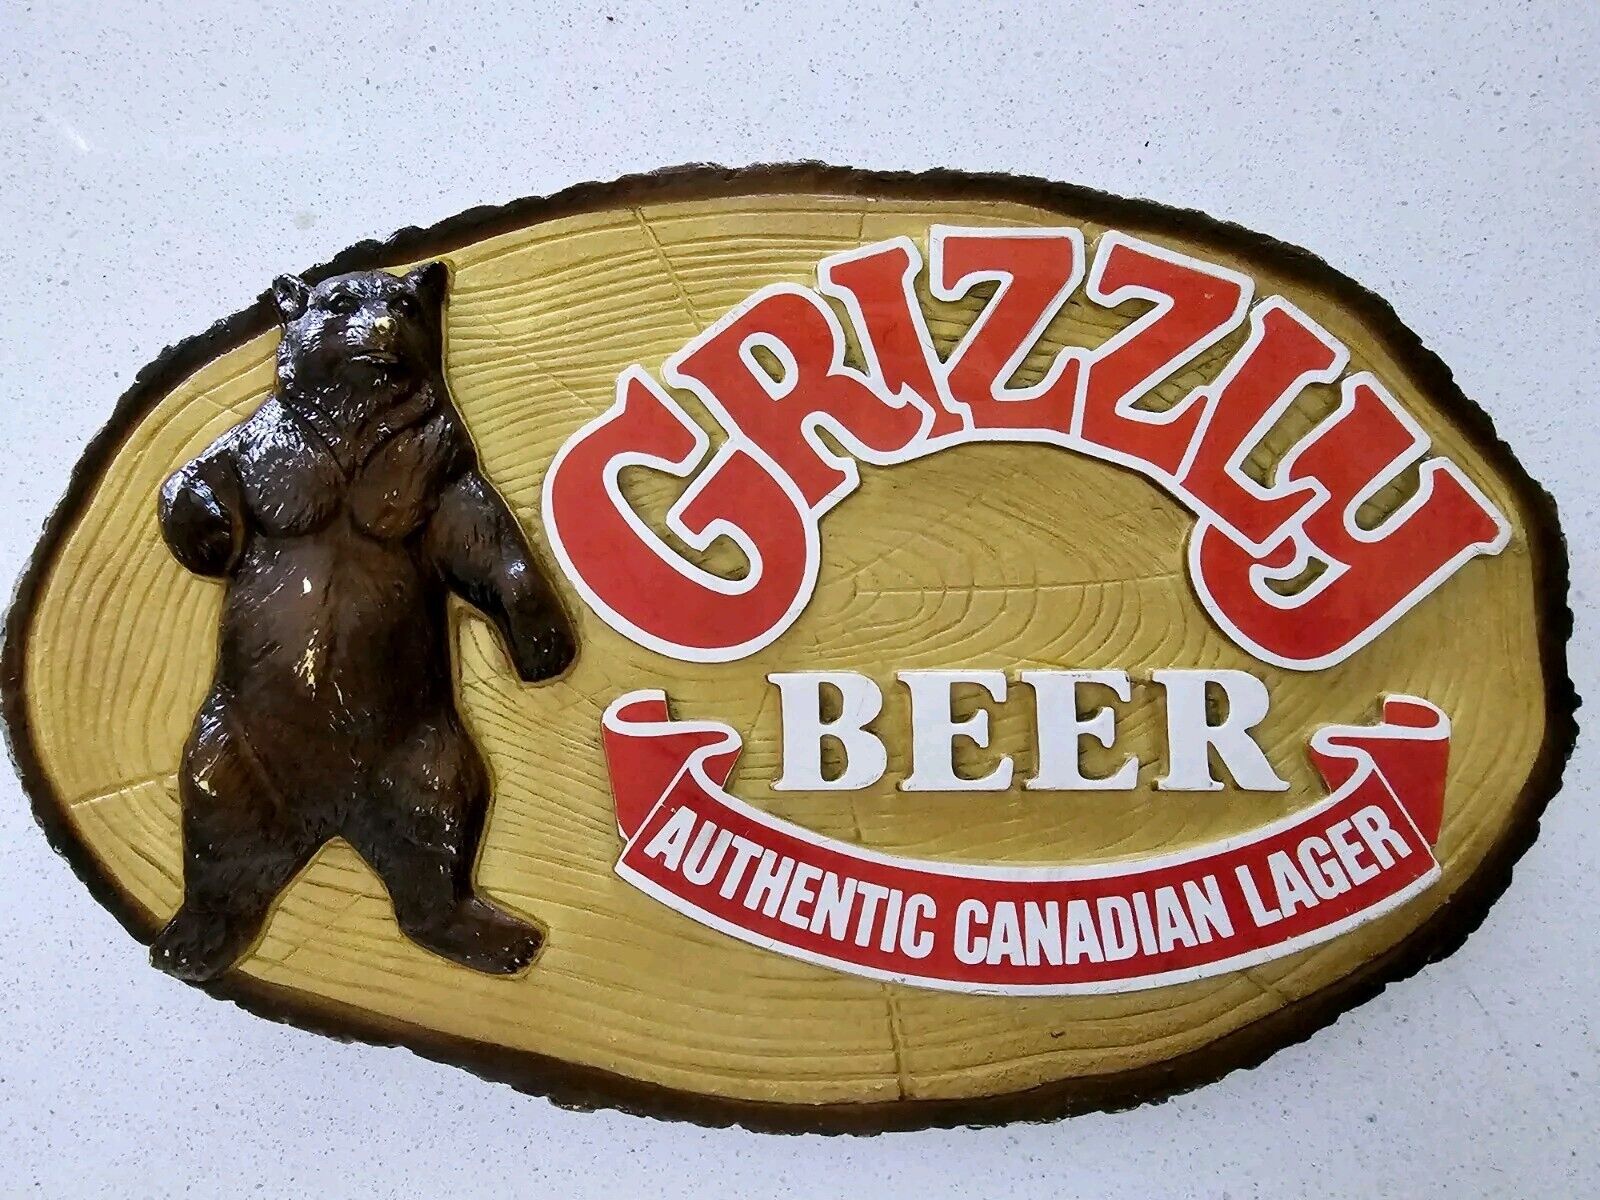 Vintage GRIZZLY Beer~Authentic Canadian Lager Plastic Beer Sign; Van Munching